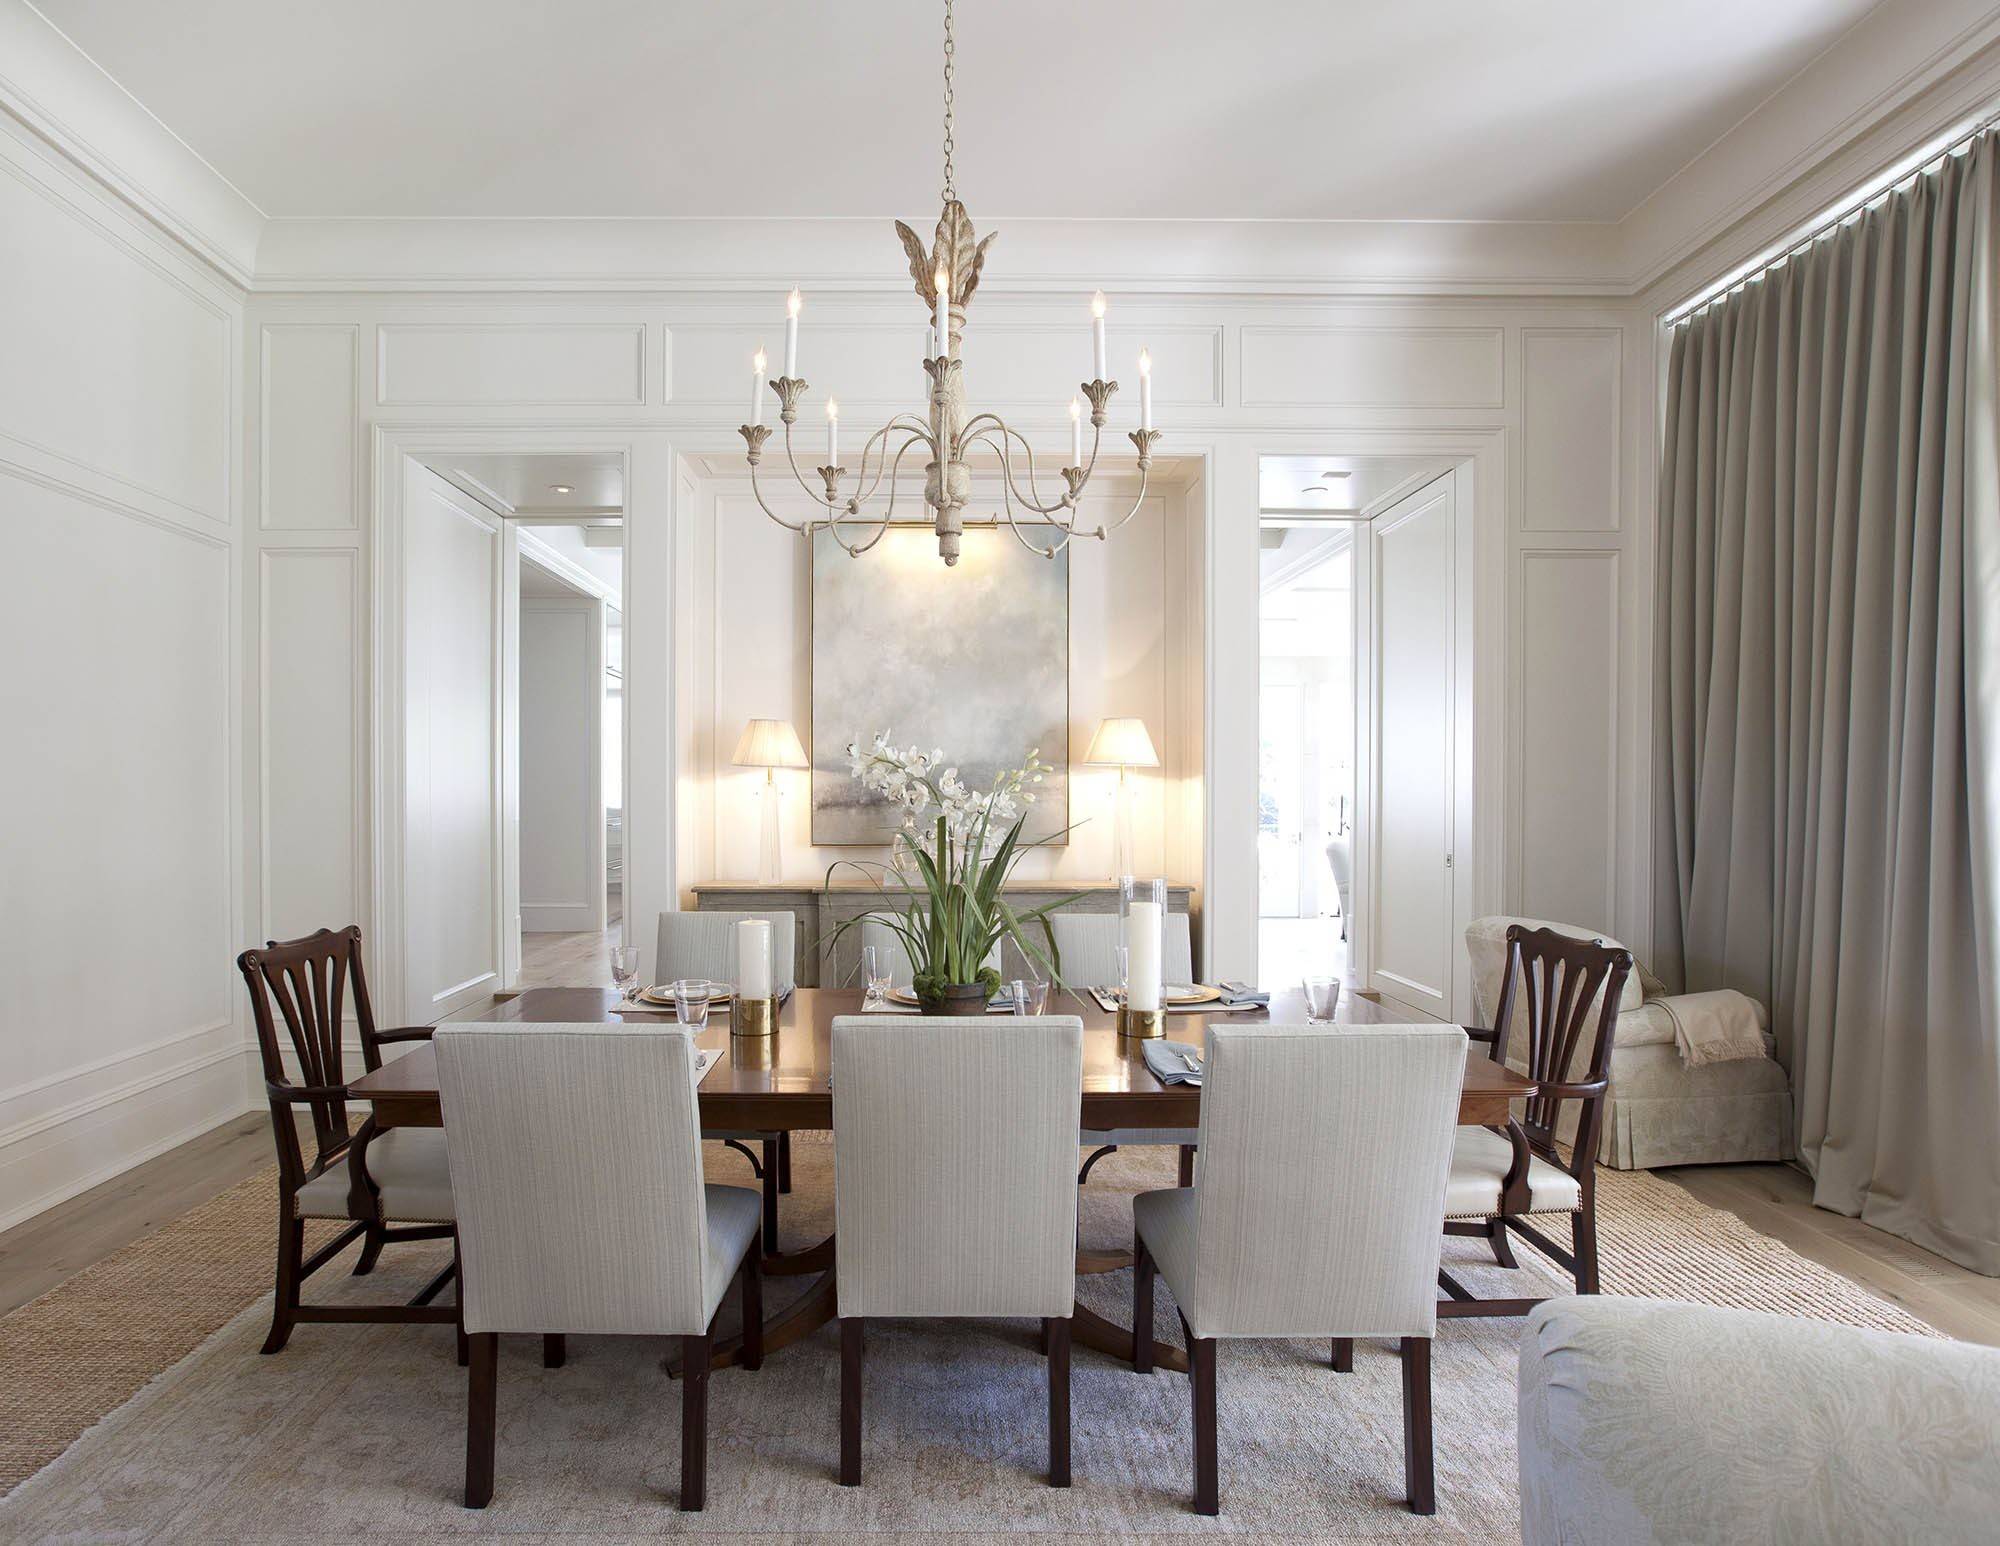 Elegant modern dining room featured in home tour with traditional details